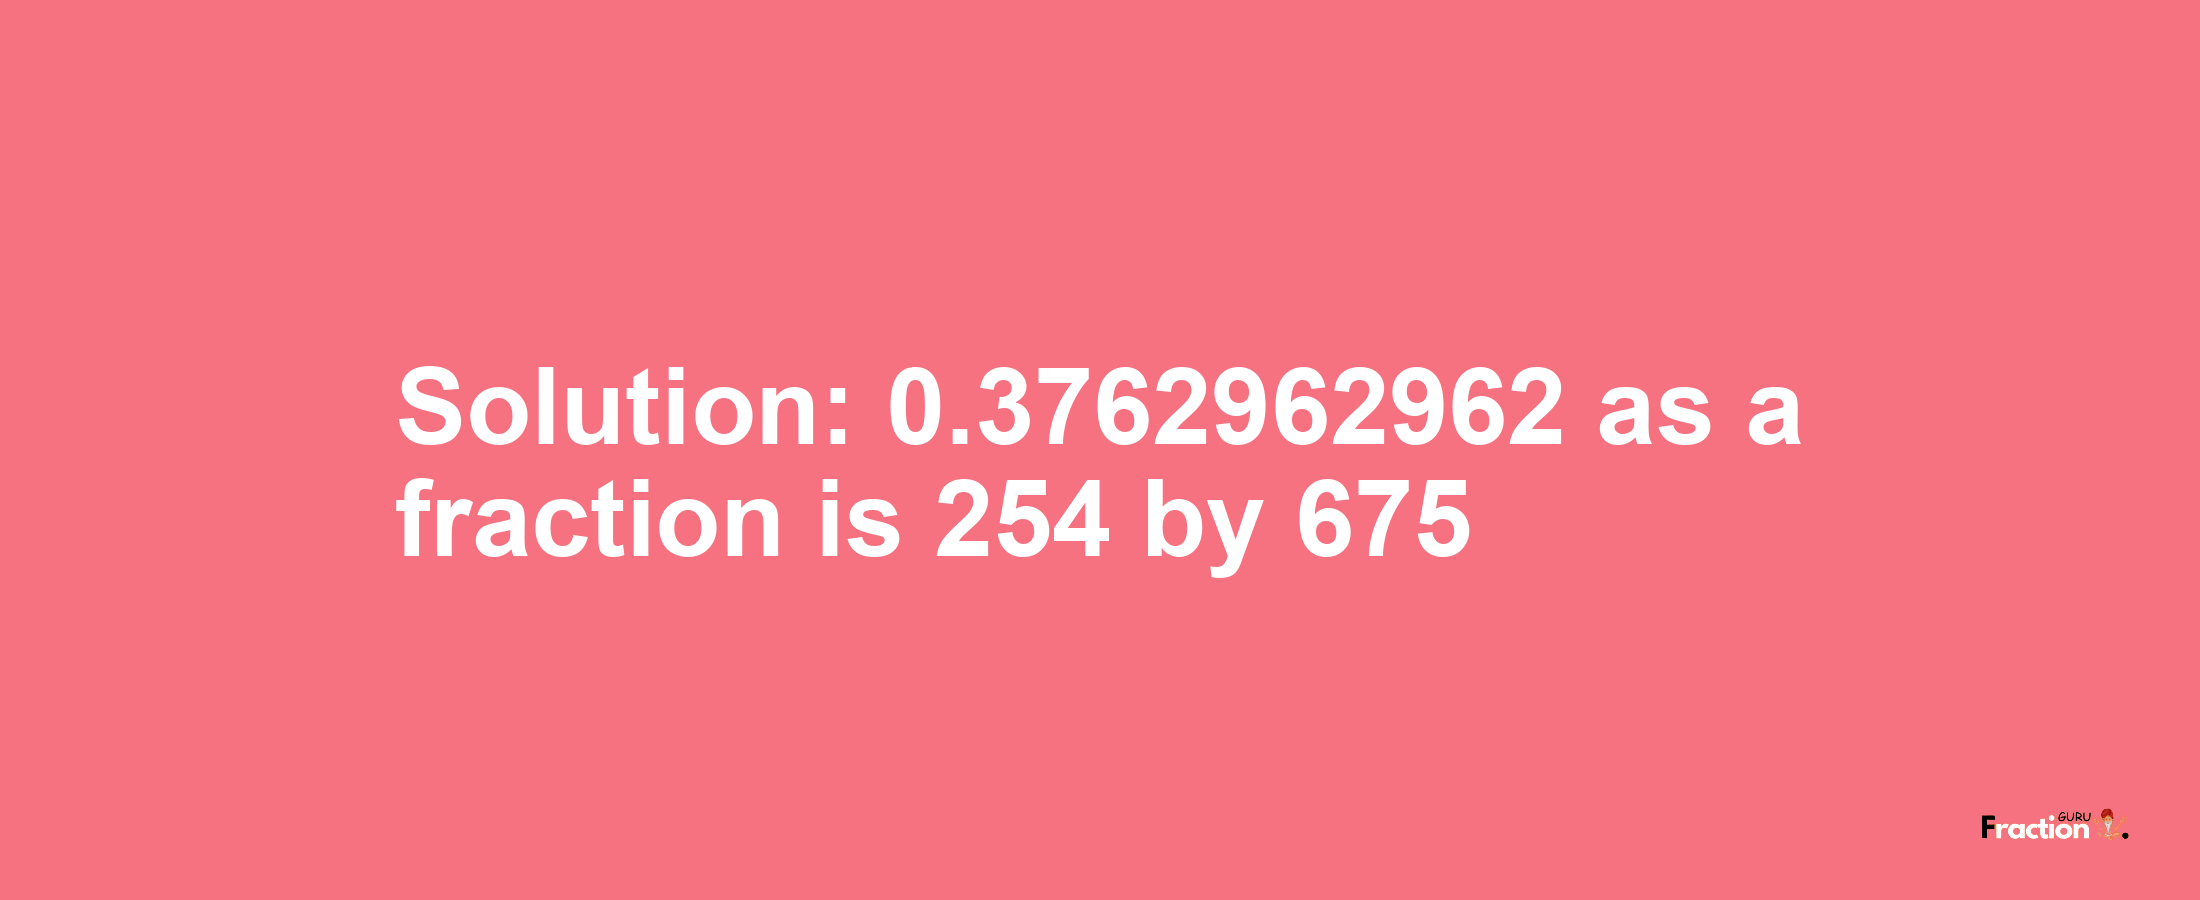 Solution:0.3762962962 as a fraction is 254/675